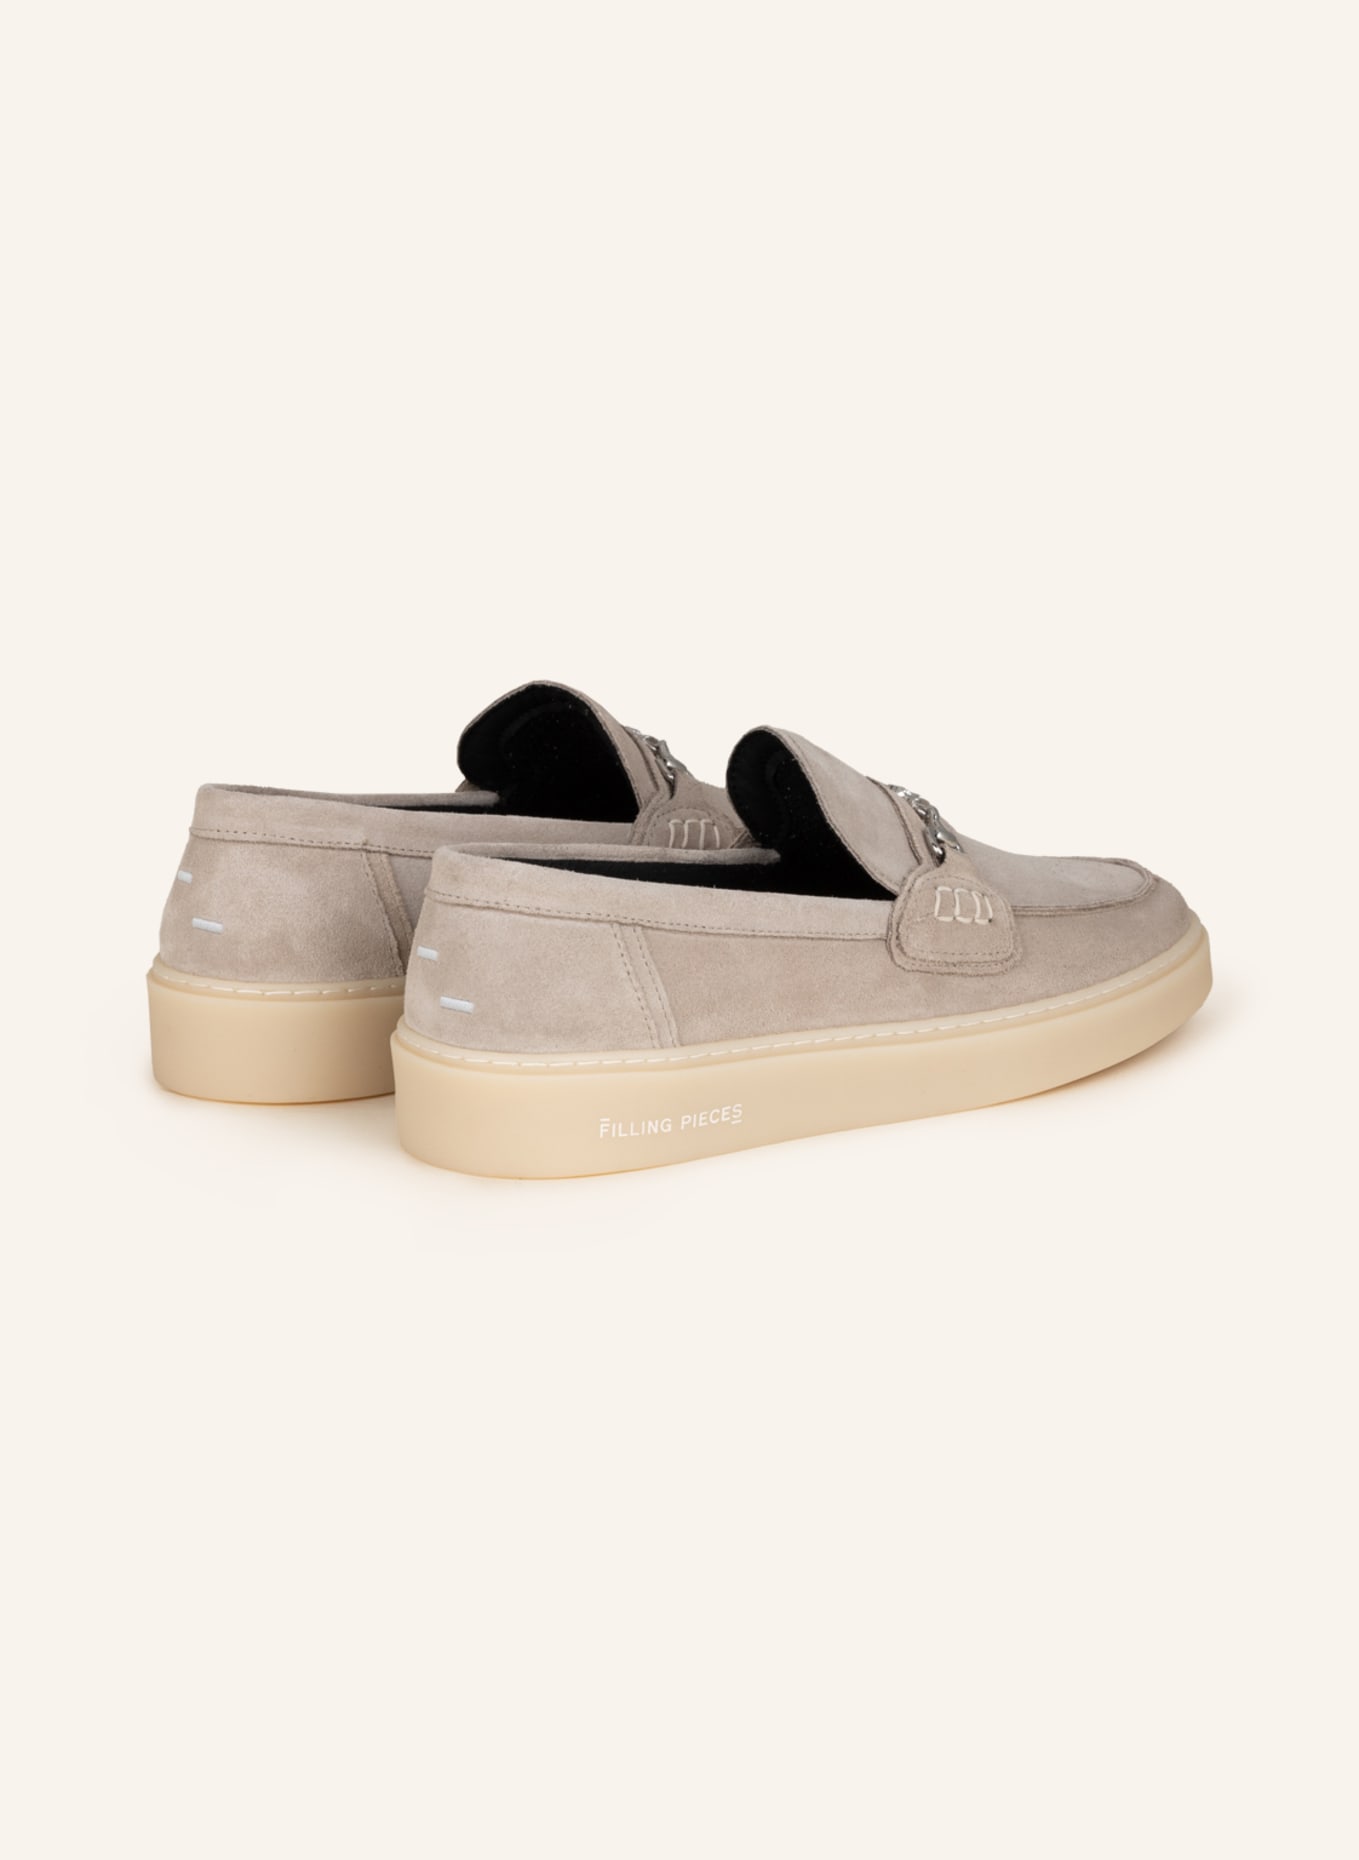 FILLING PIECES Loafer CORE, Farbe: TAUPE (Bild 2)